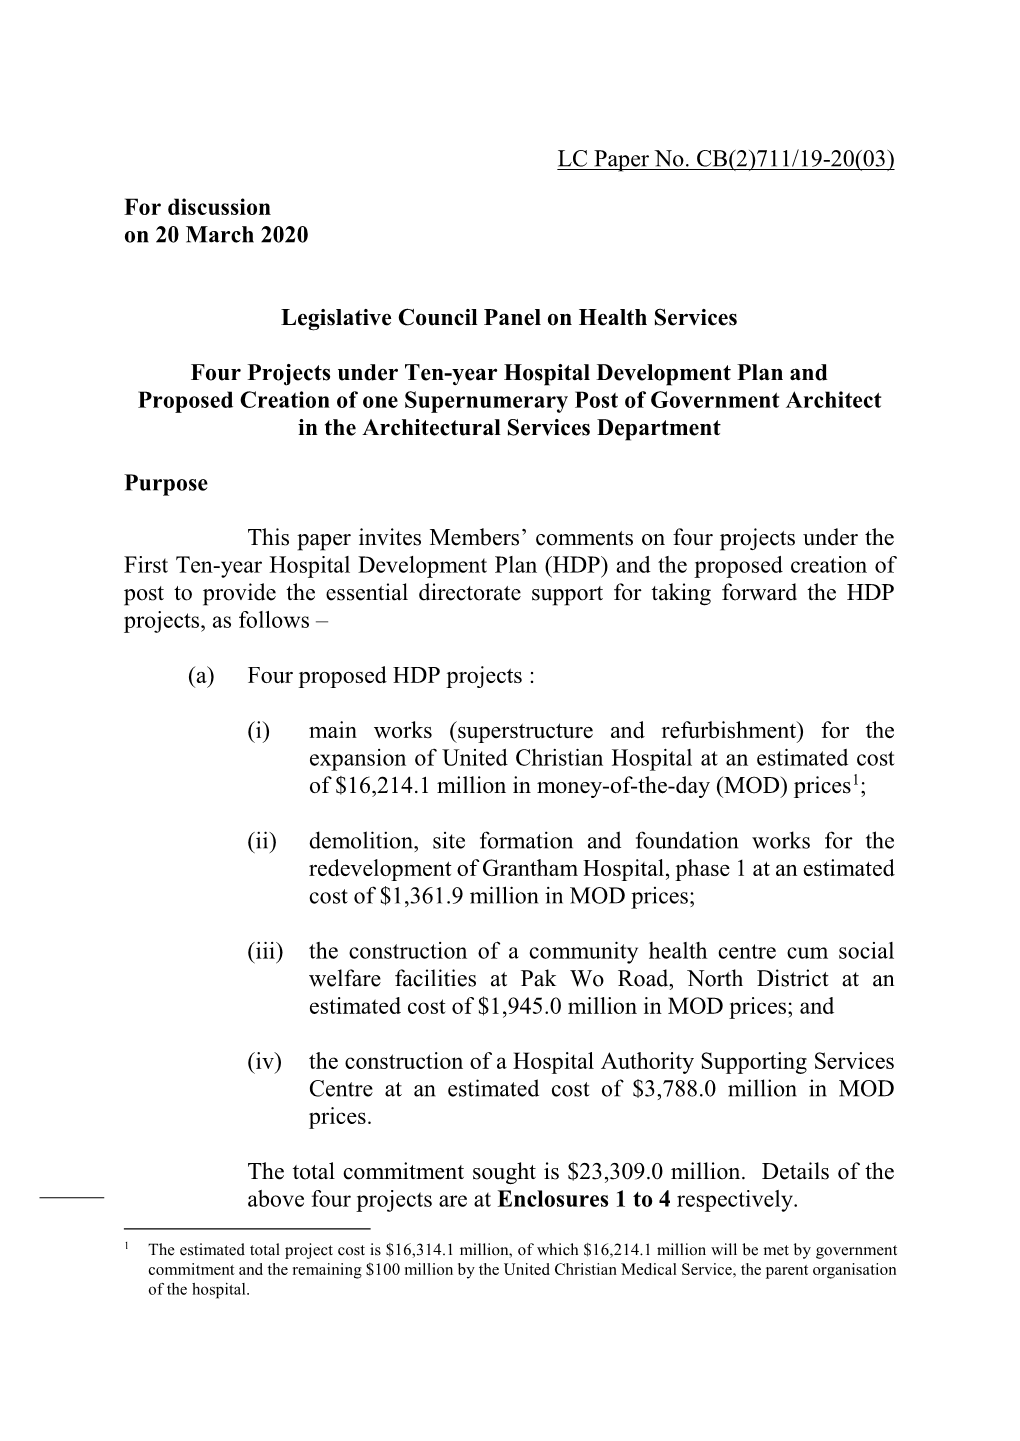 LC Paper No. CB(2)711/19-20(03) for Discussion on 20 March 2020